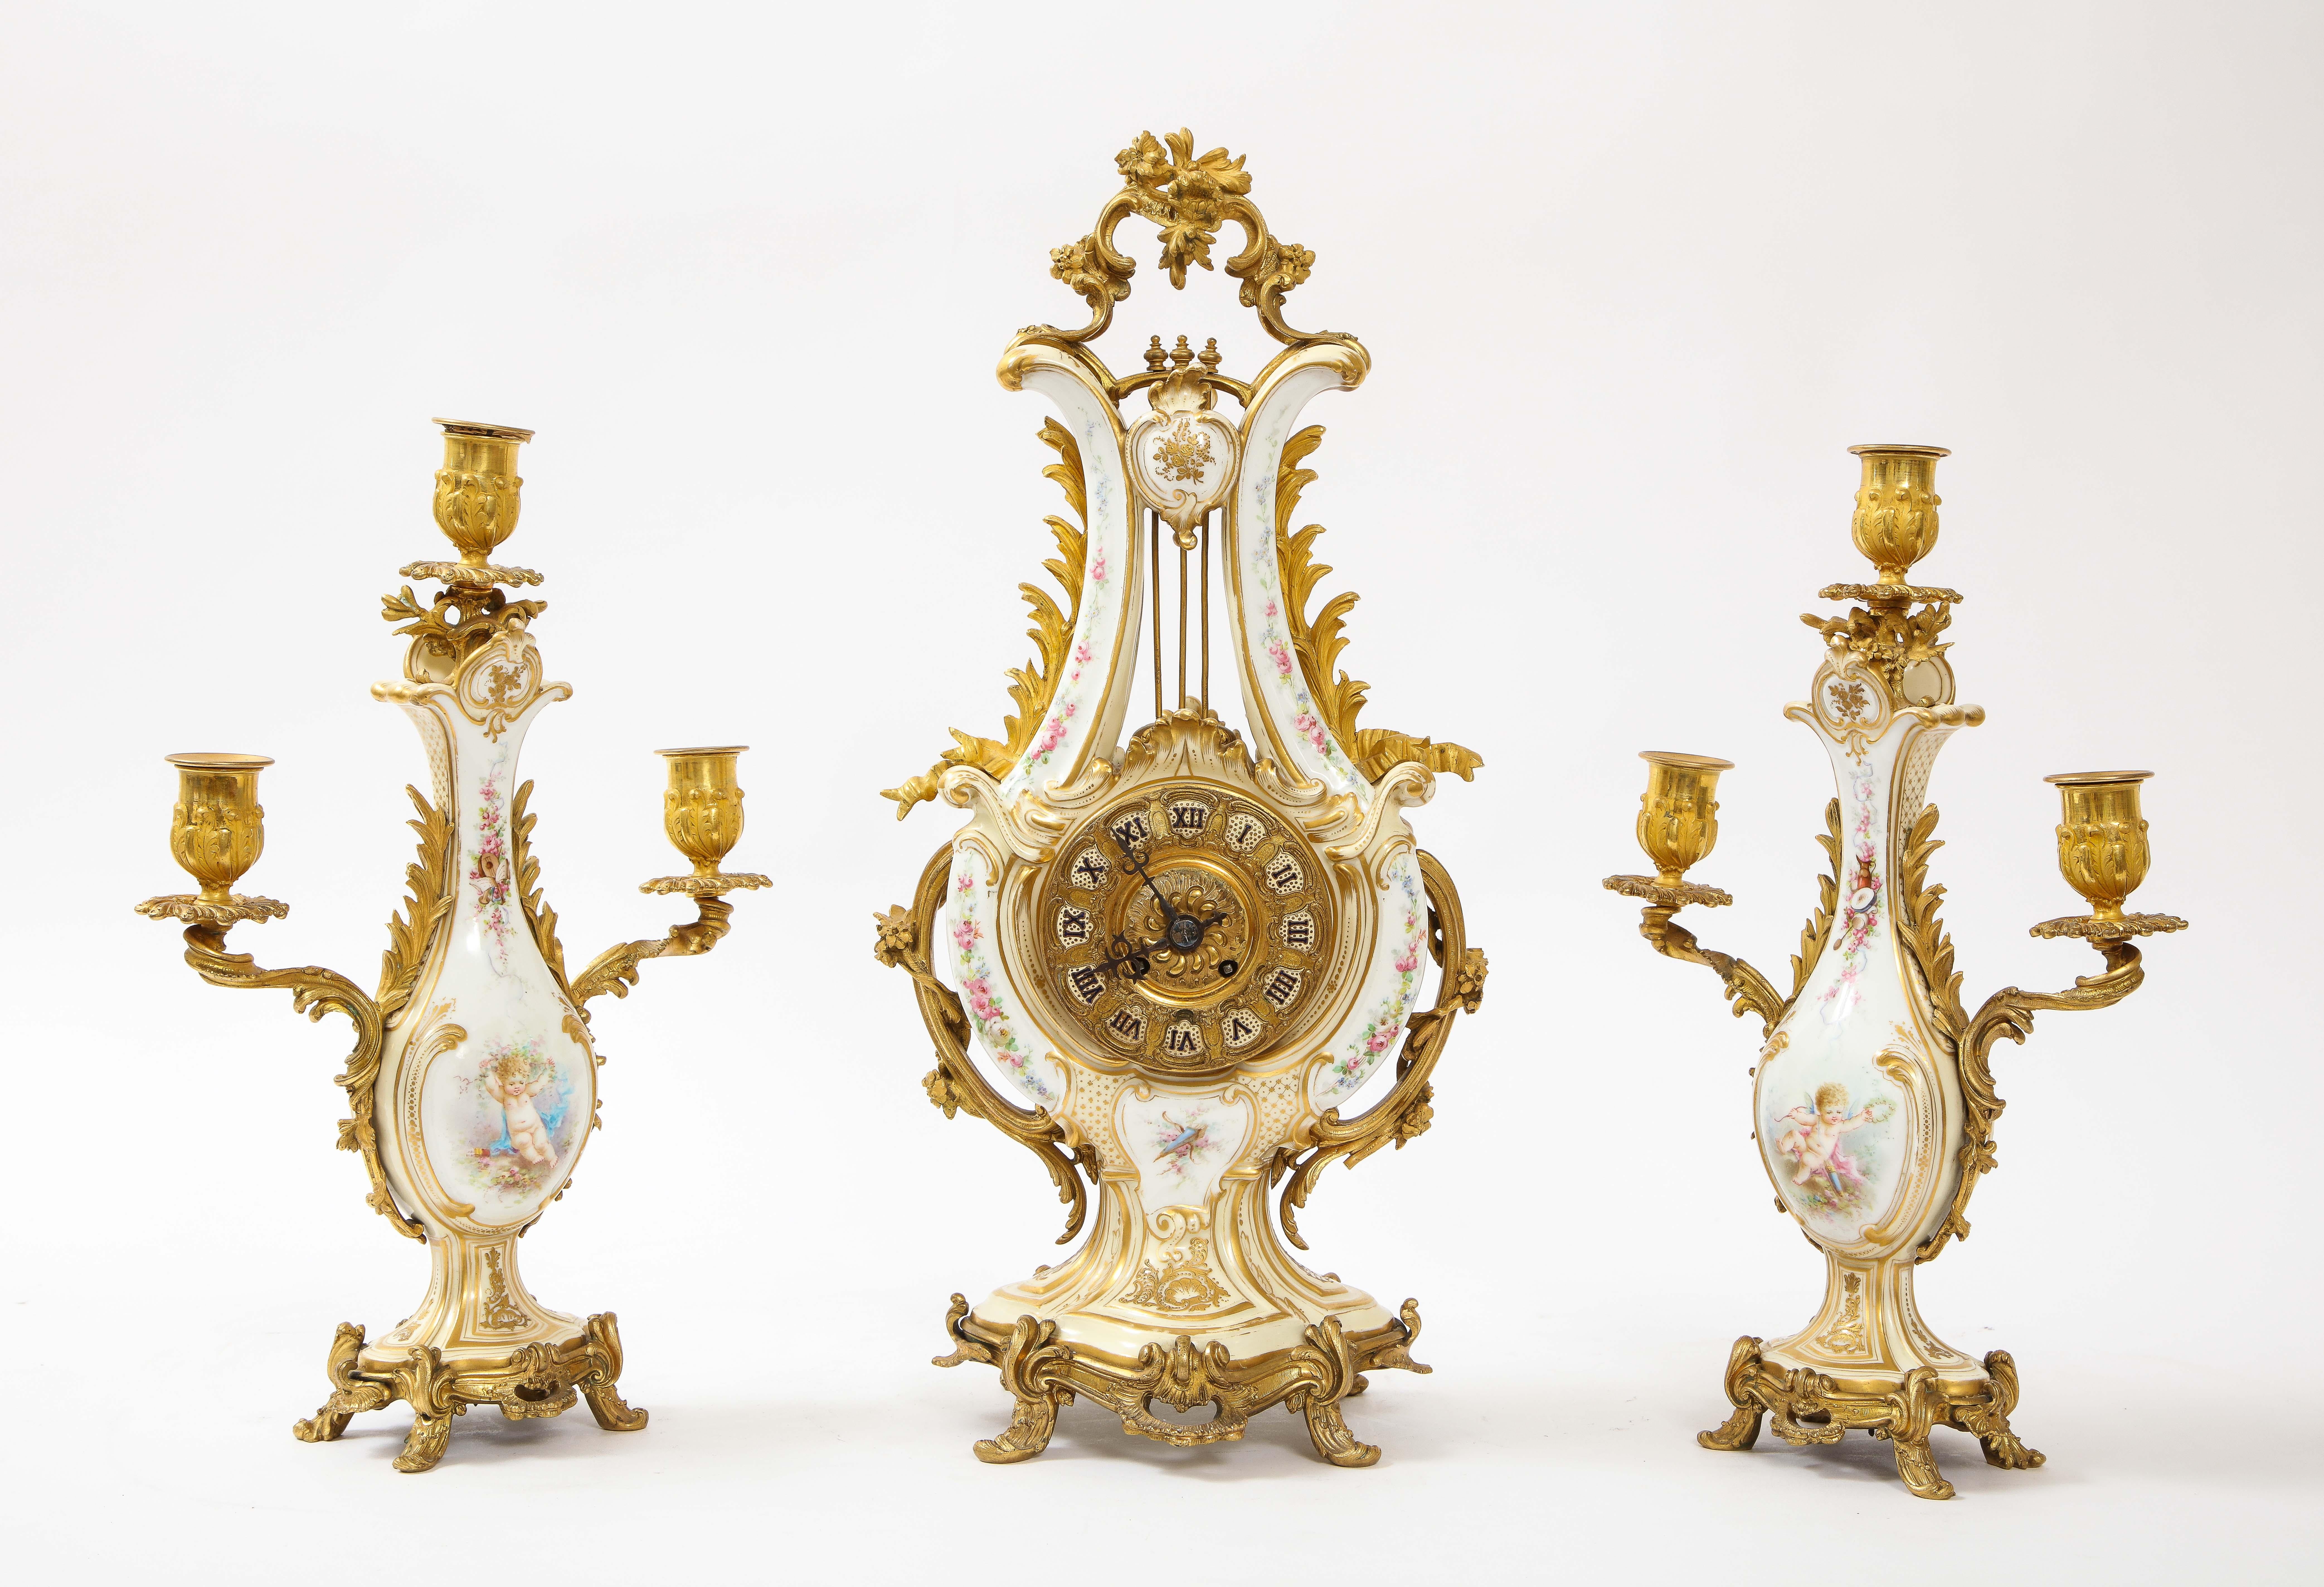 A gorgeous and very unusual 19th century French dore bronze mounted Sevres white porcelain three-piece clock and three-light candelabra garniture set. The Lyre shaped clock and candelabras are beautifully made with the finest French Sevres white